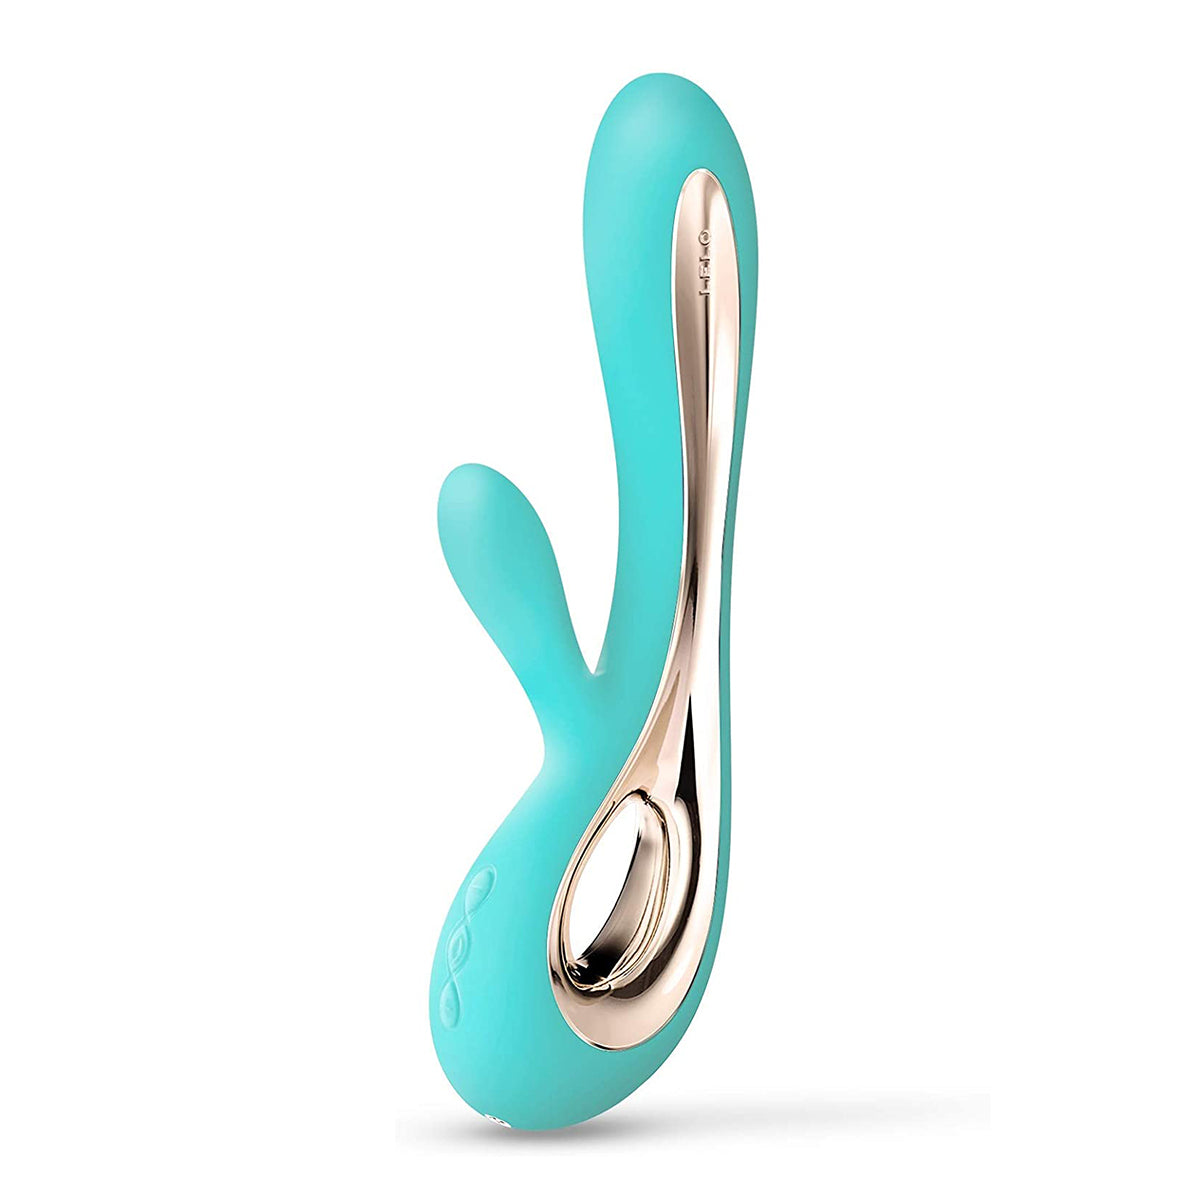 Lelo Soraya 2 G-Spot and Clitoral Dual stimulation - Thorn & Feather Sex Toy Canada